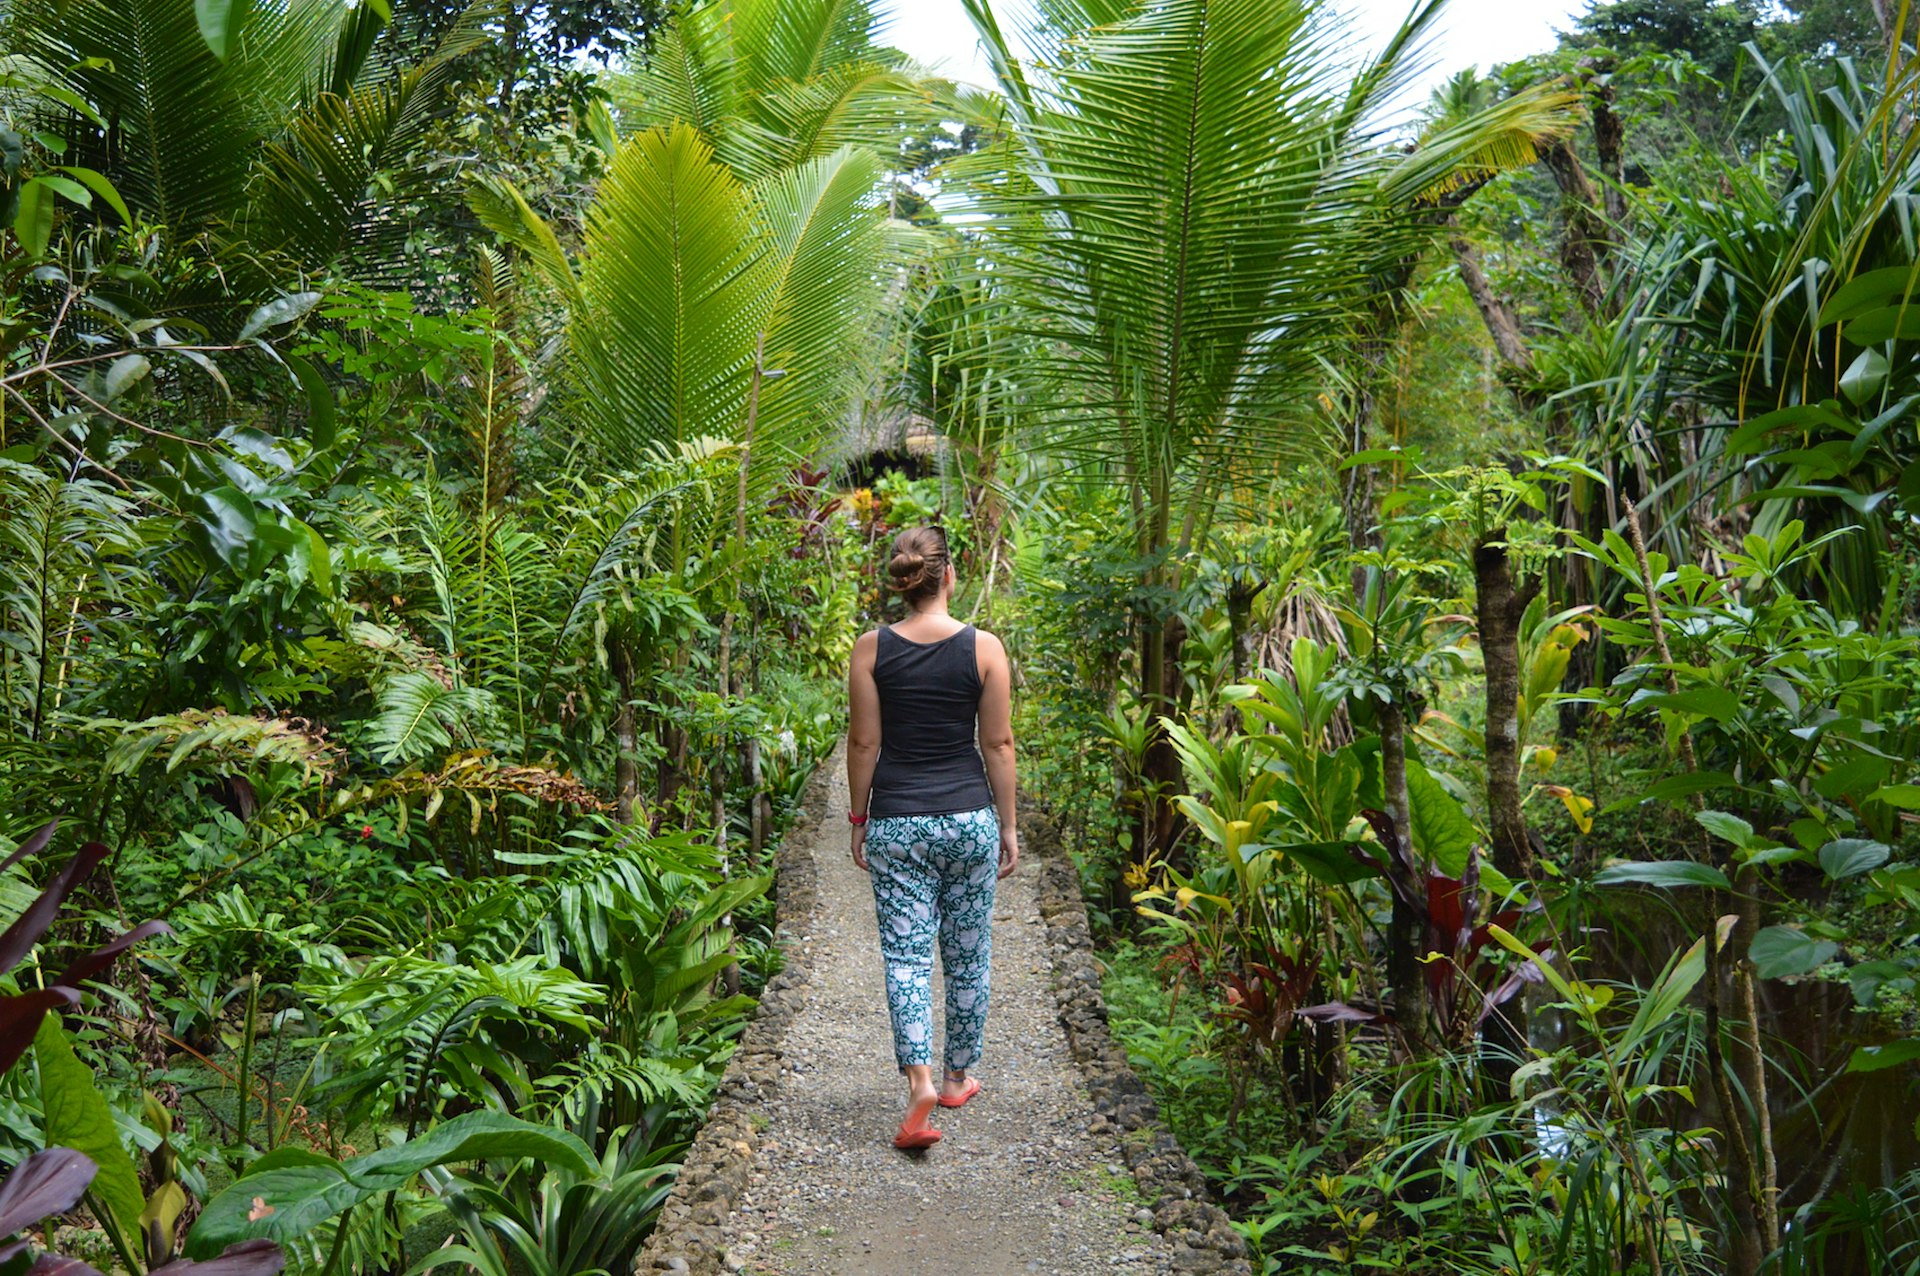 A woman walking on a path surrounded by tropical greenery, seen from behind